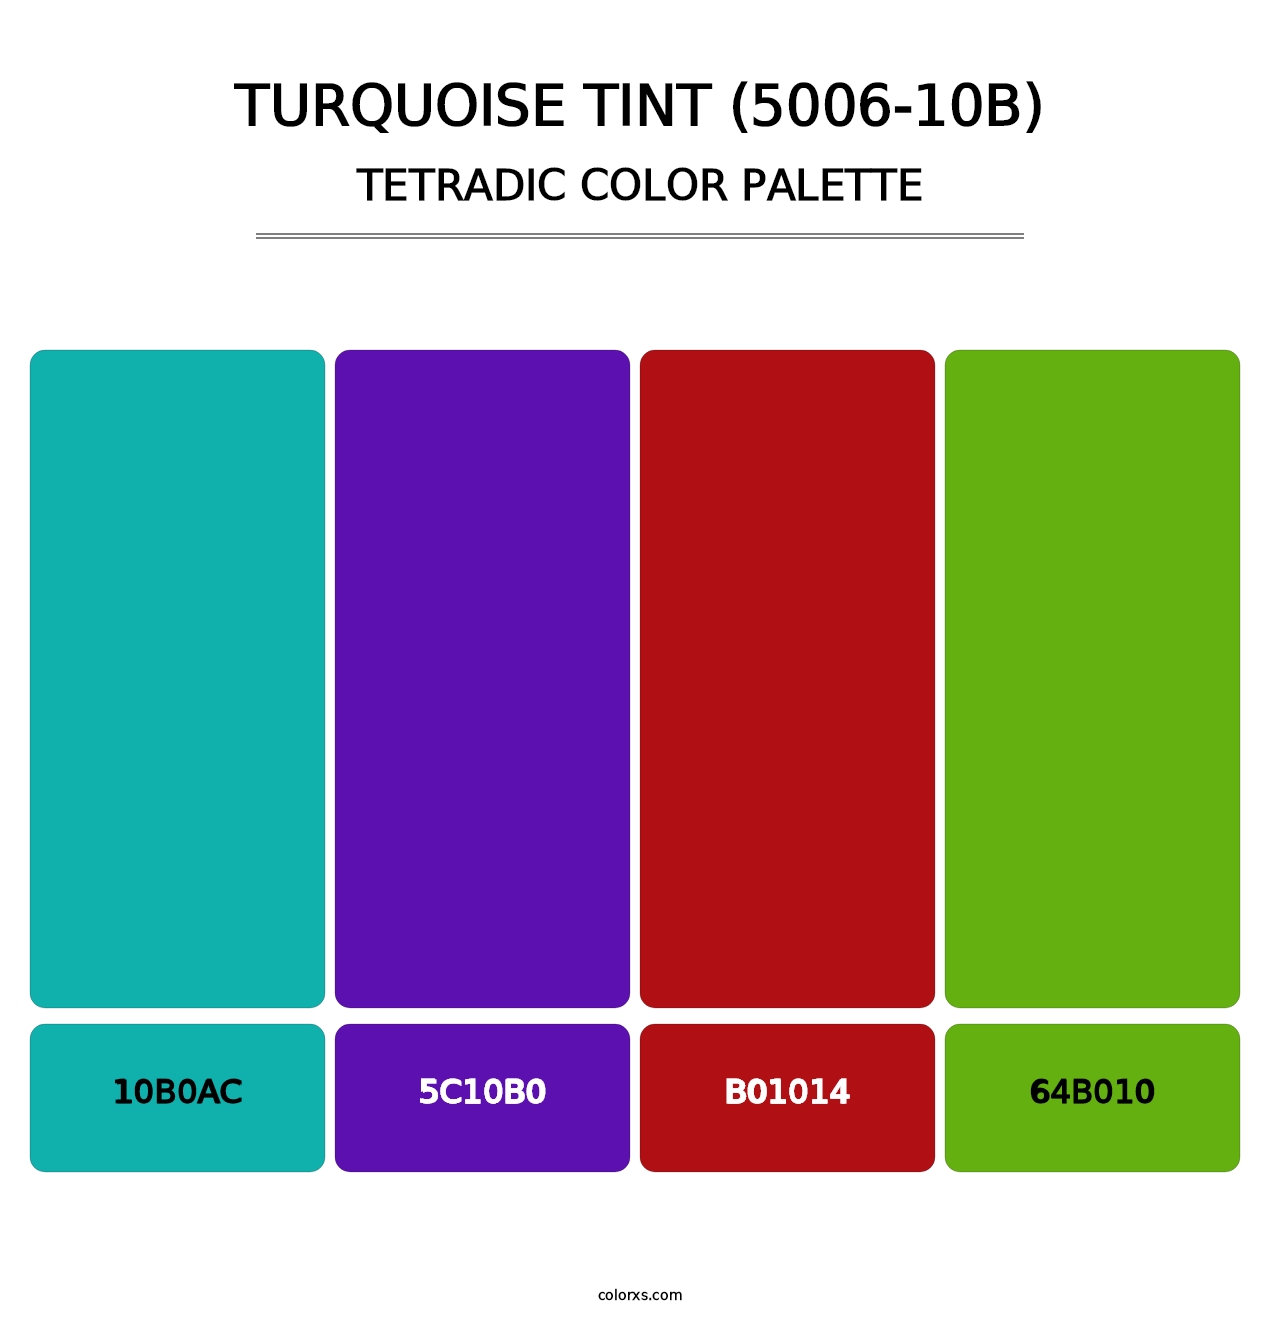 Turquoise Tint (5006-10B) - Tetradic Color Palette